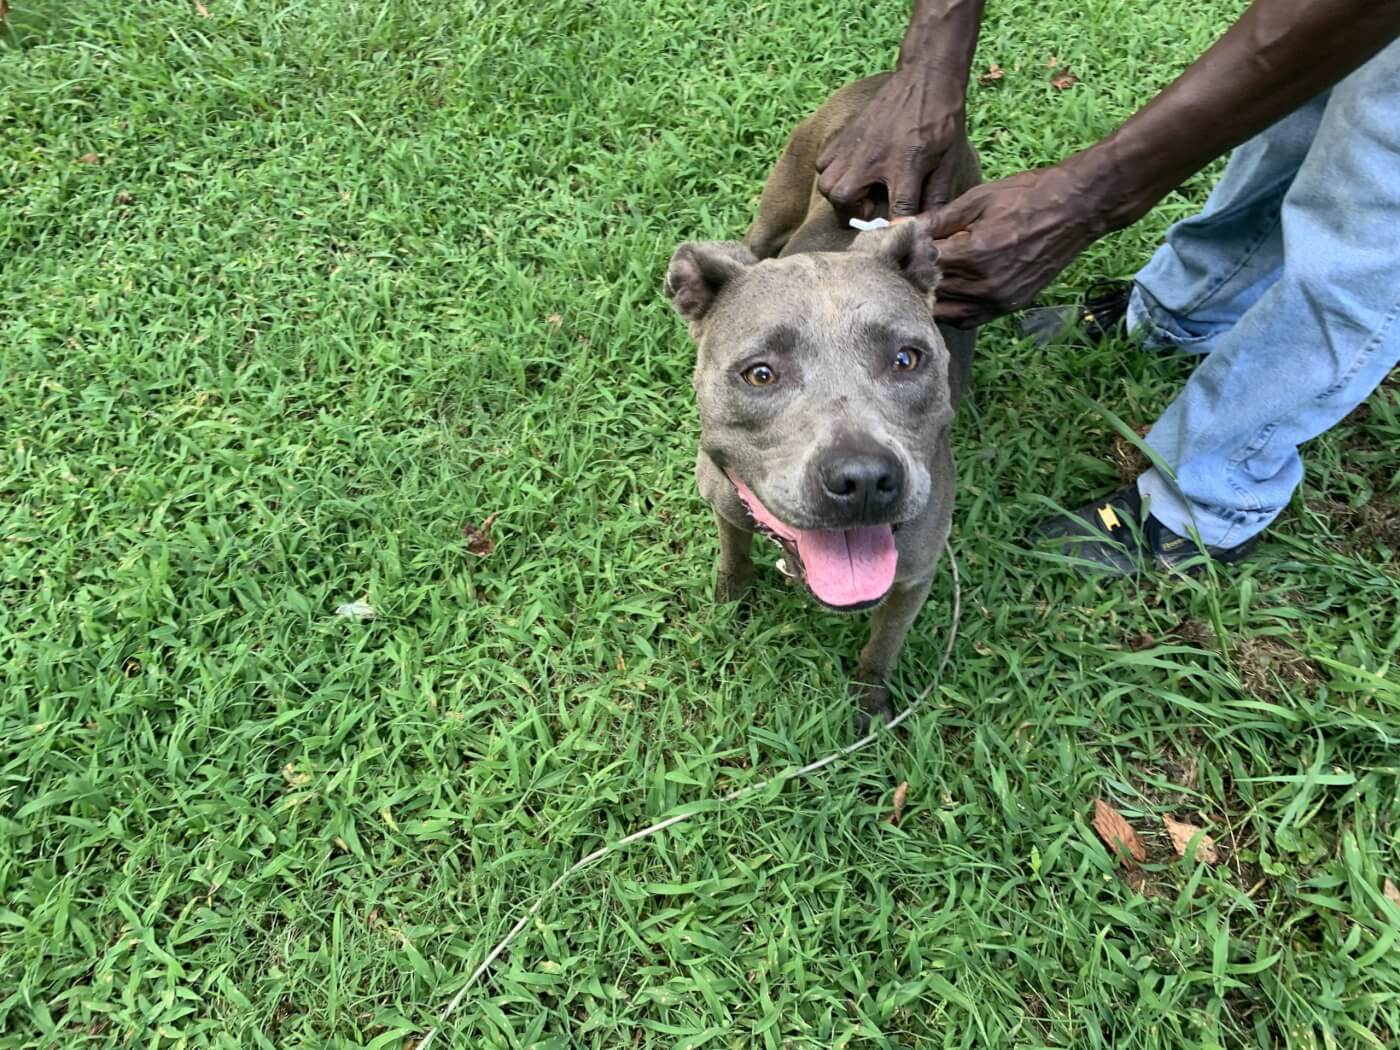 Brown pit bull in grass looking happy while being pet